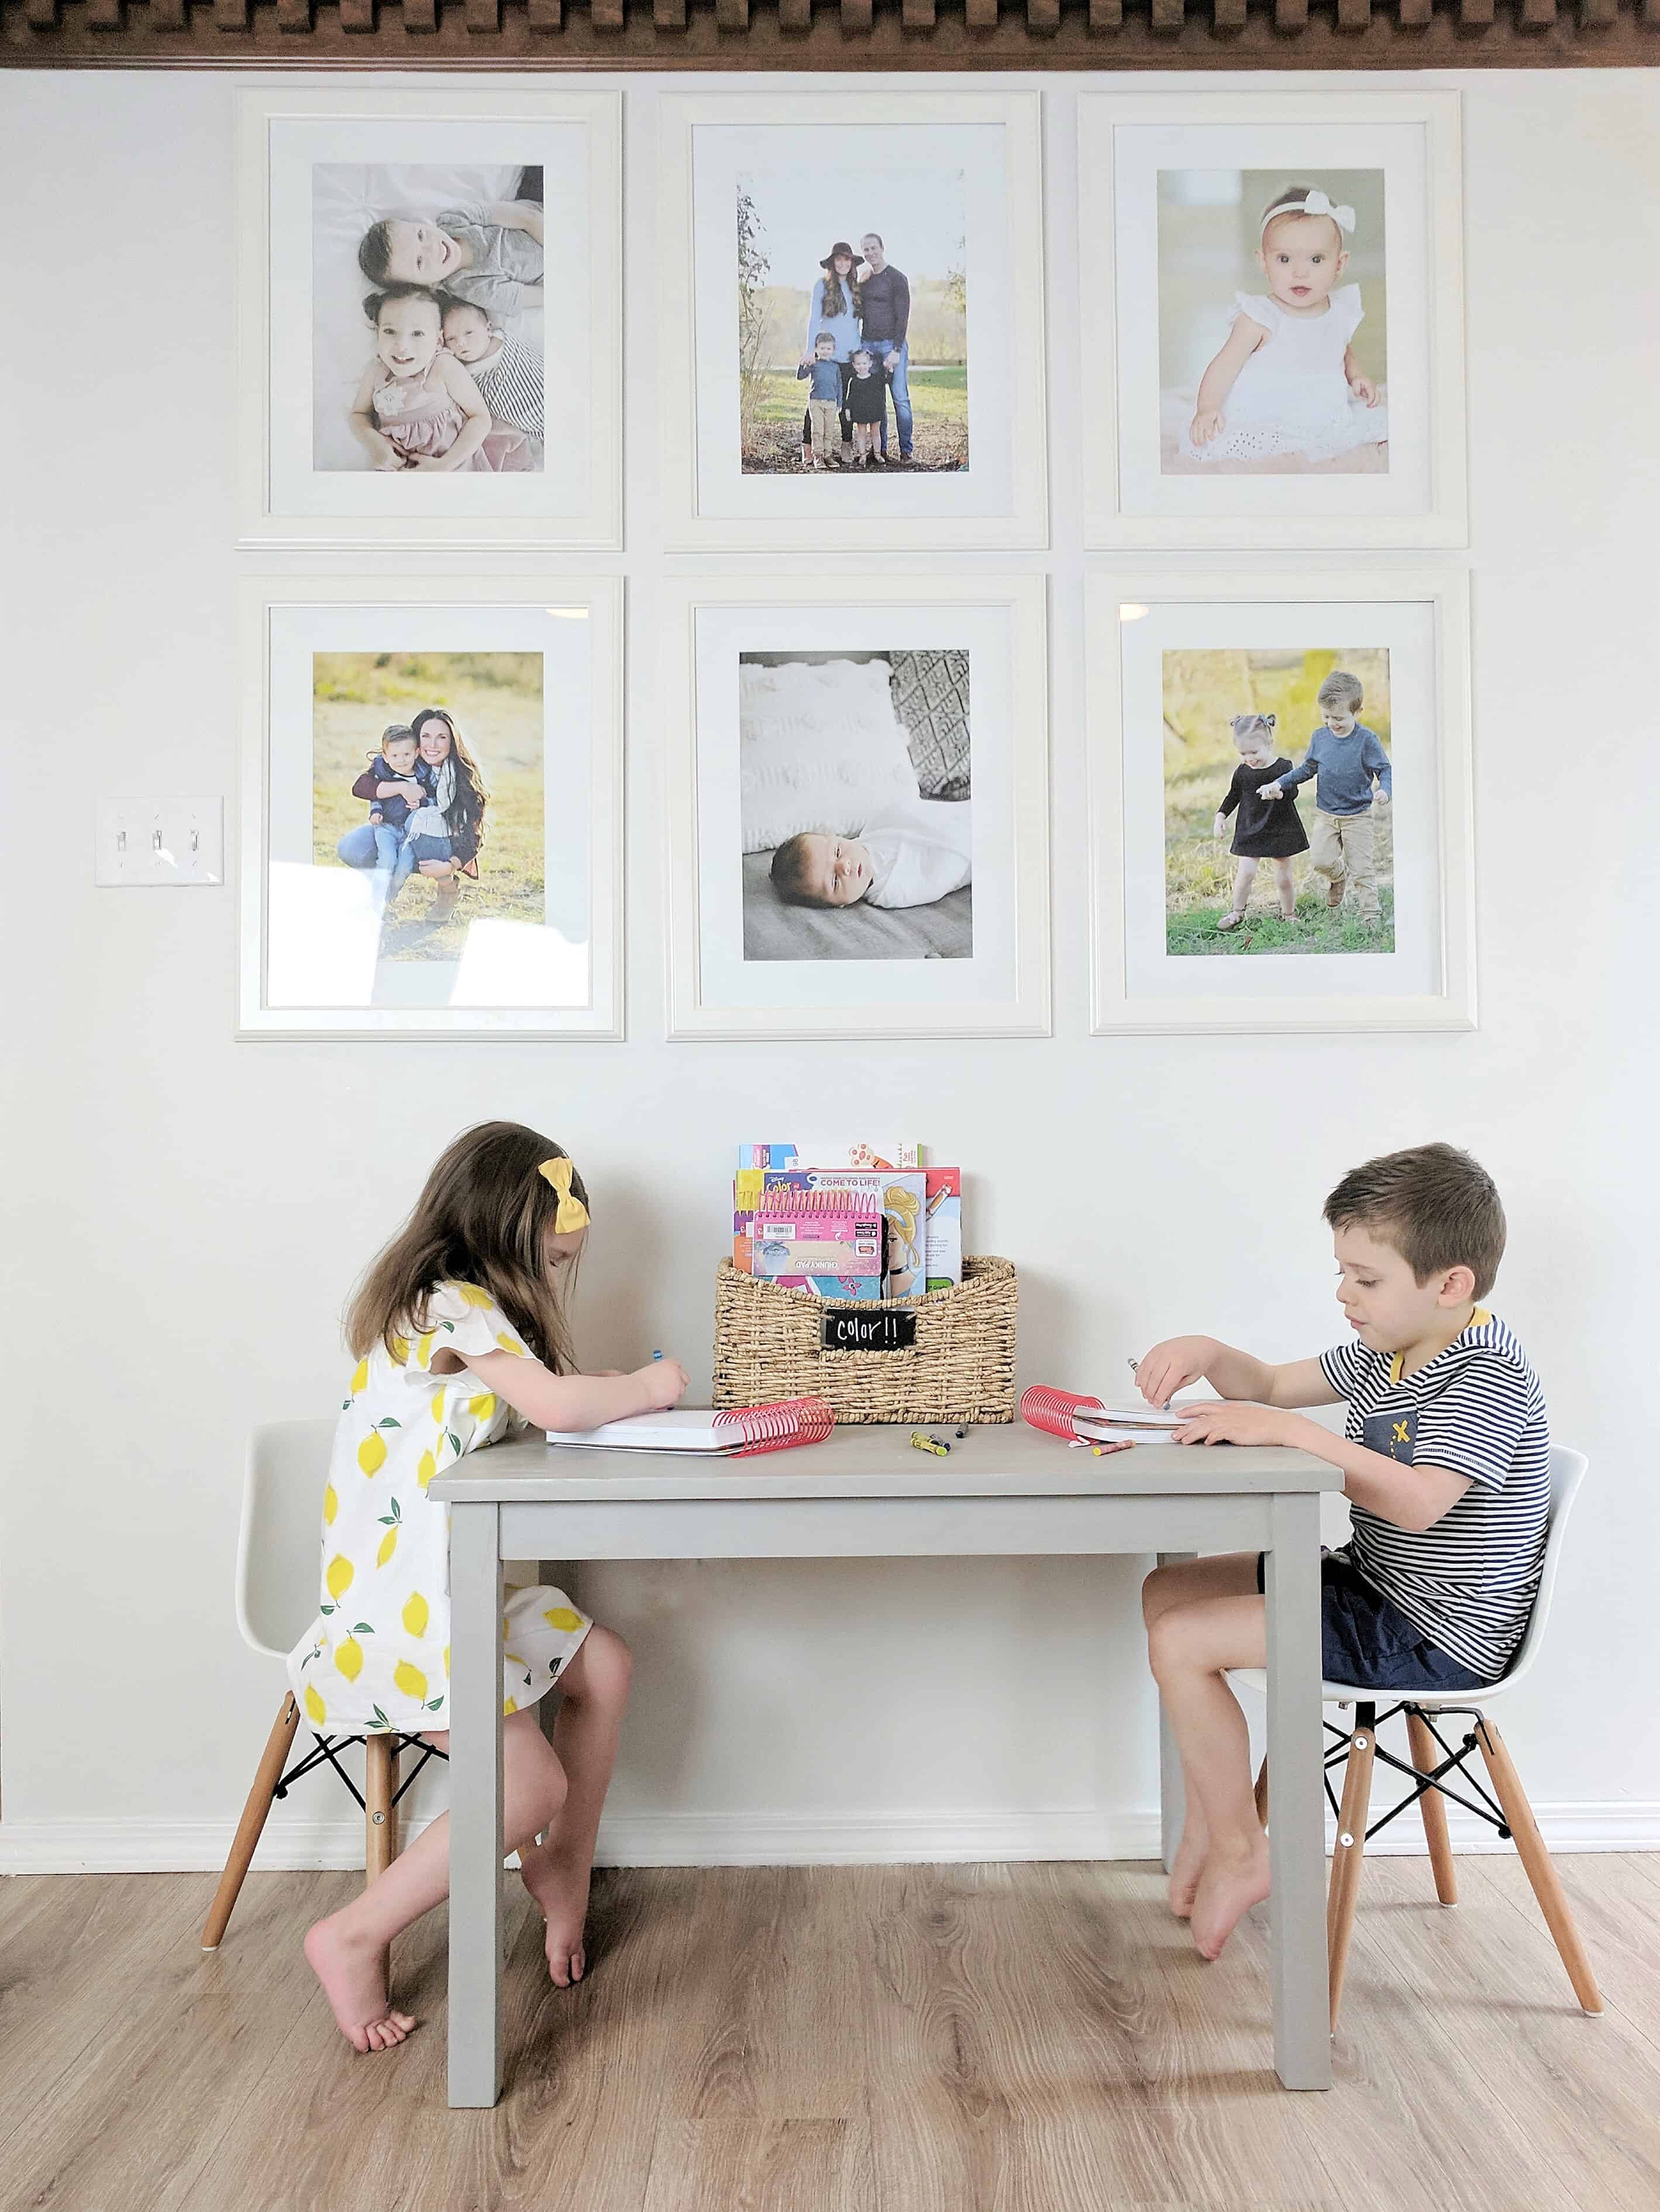 kids coloring at grey table with gallary wall over them